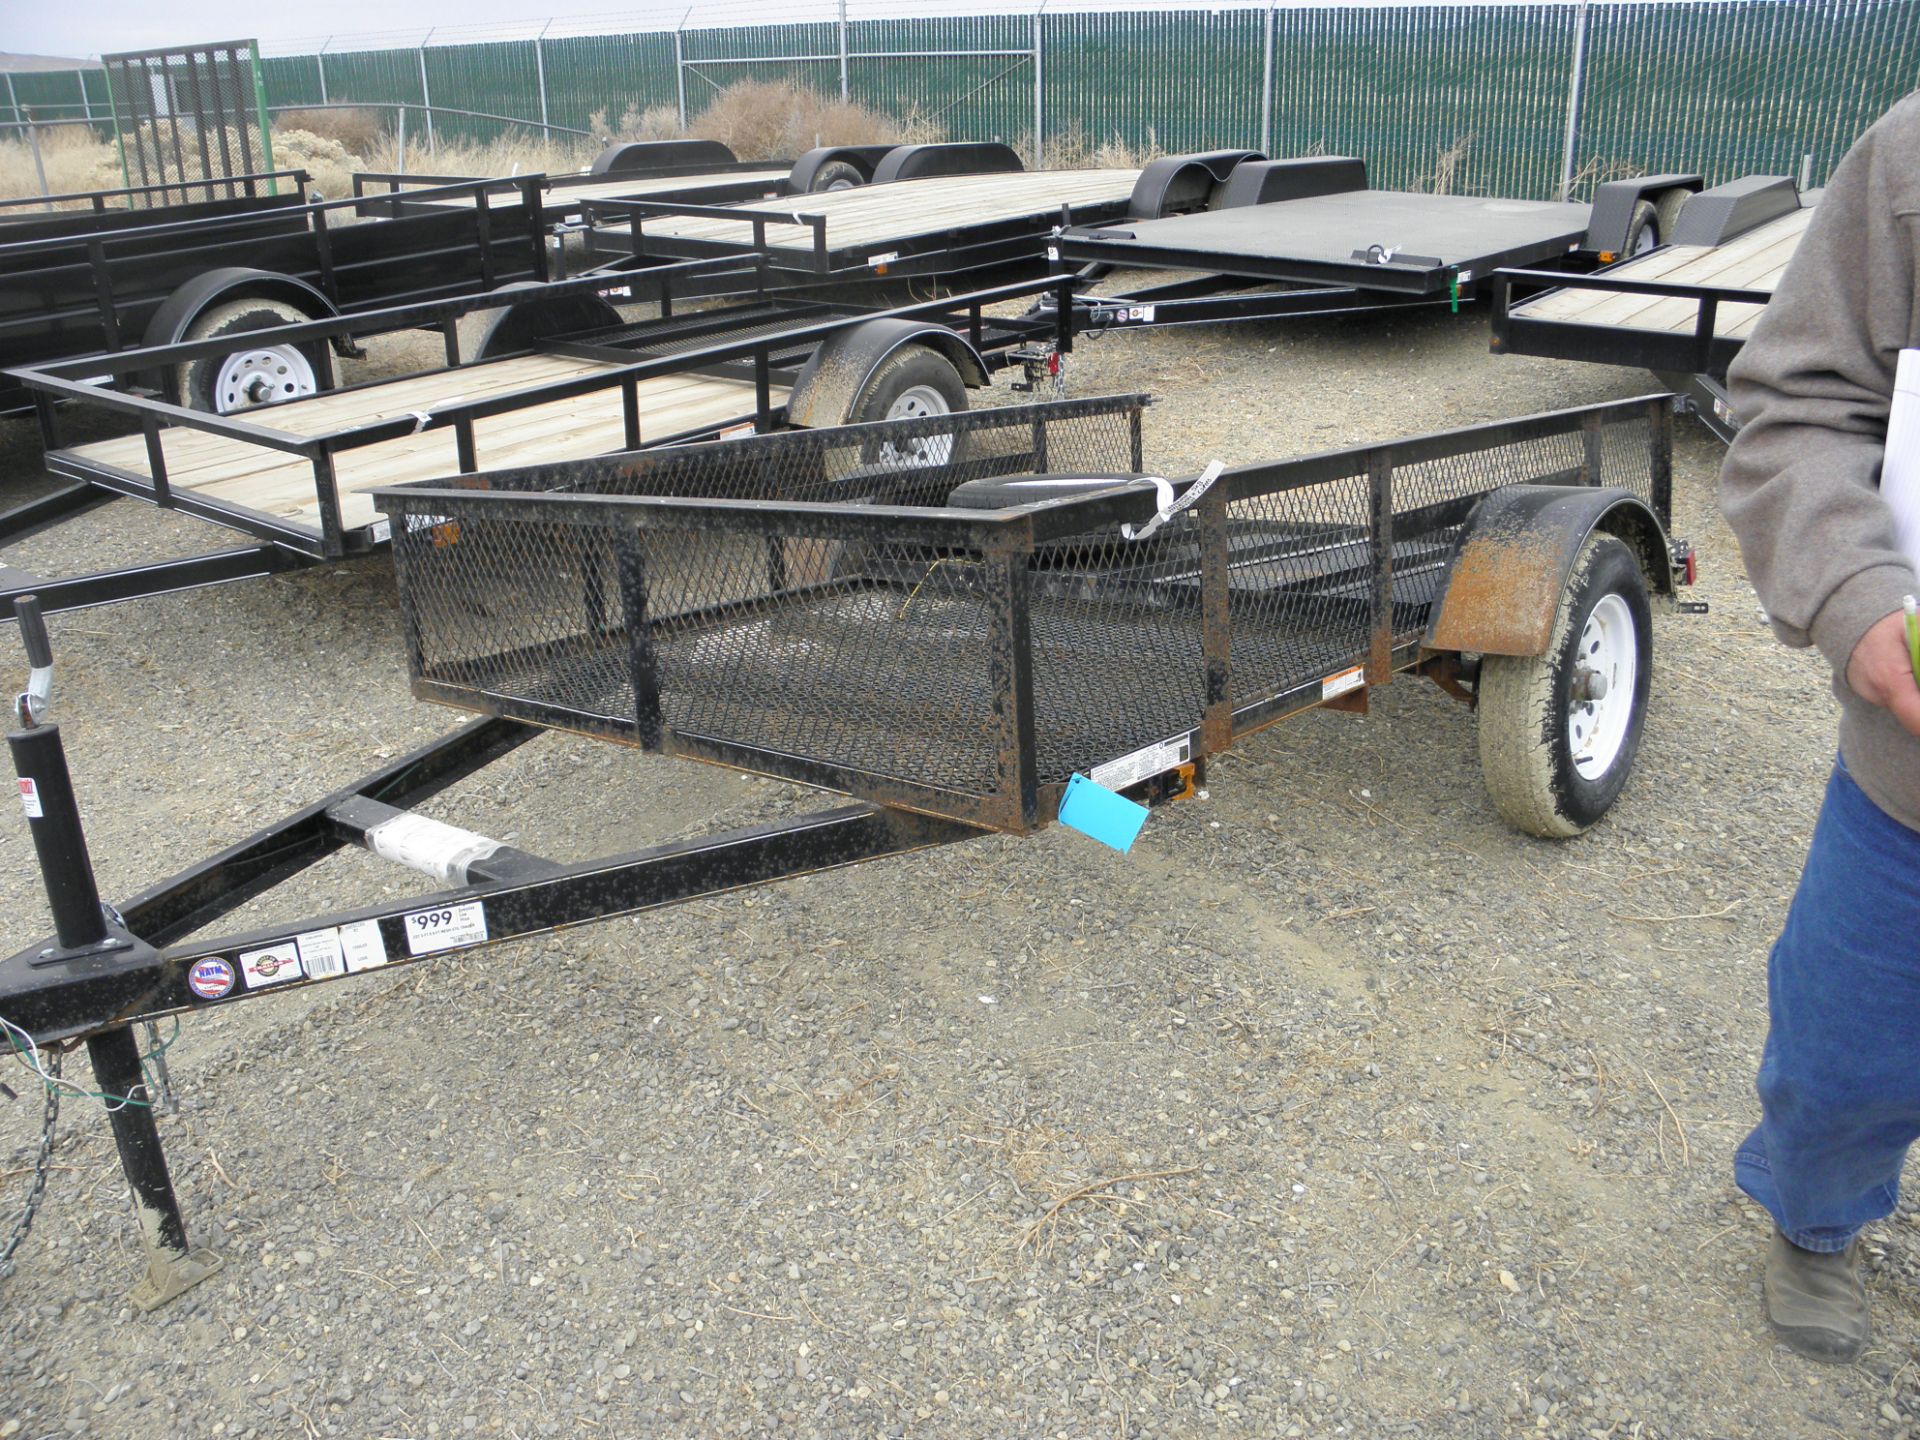 5' X 8' single alxe flatbed  w/rail sides, rear fold up ramps, expanded metal deck(used)